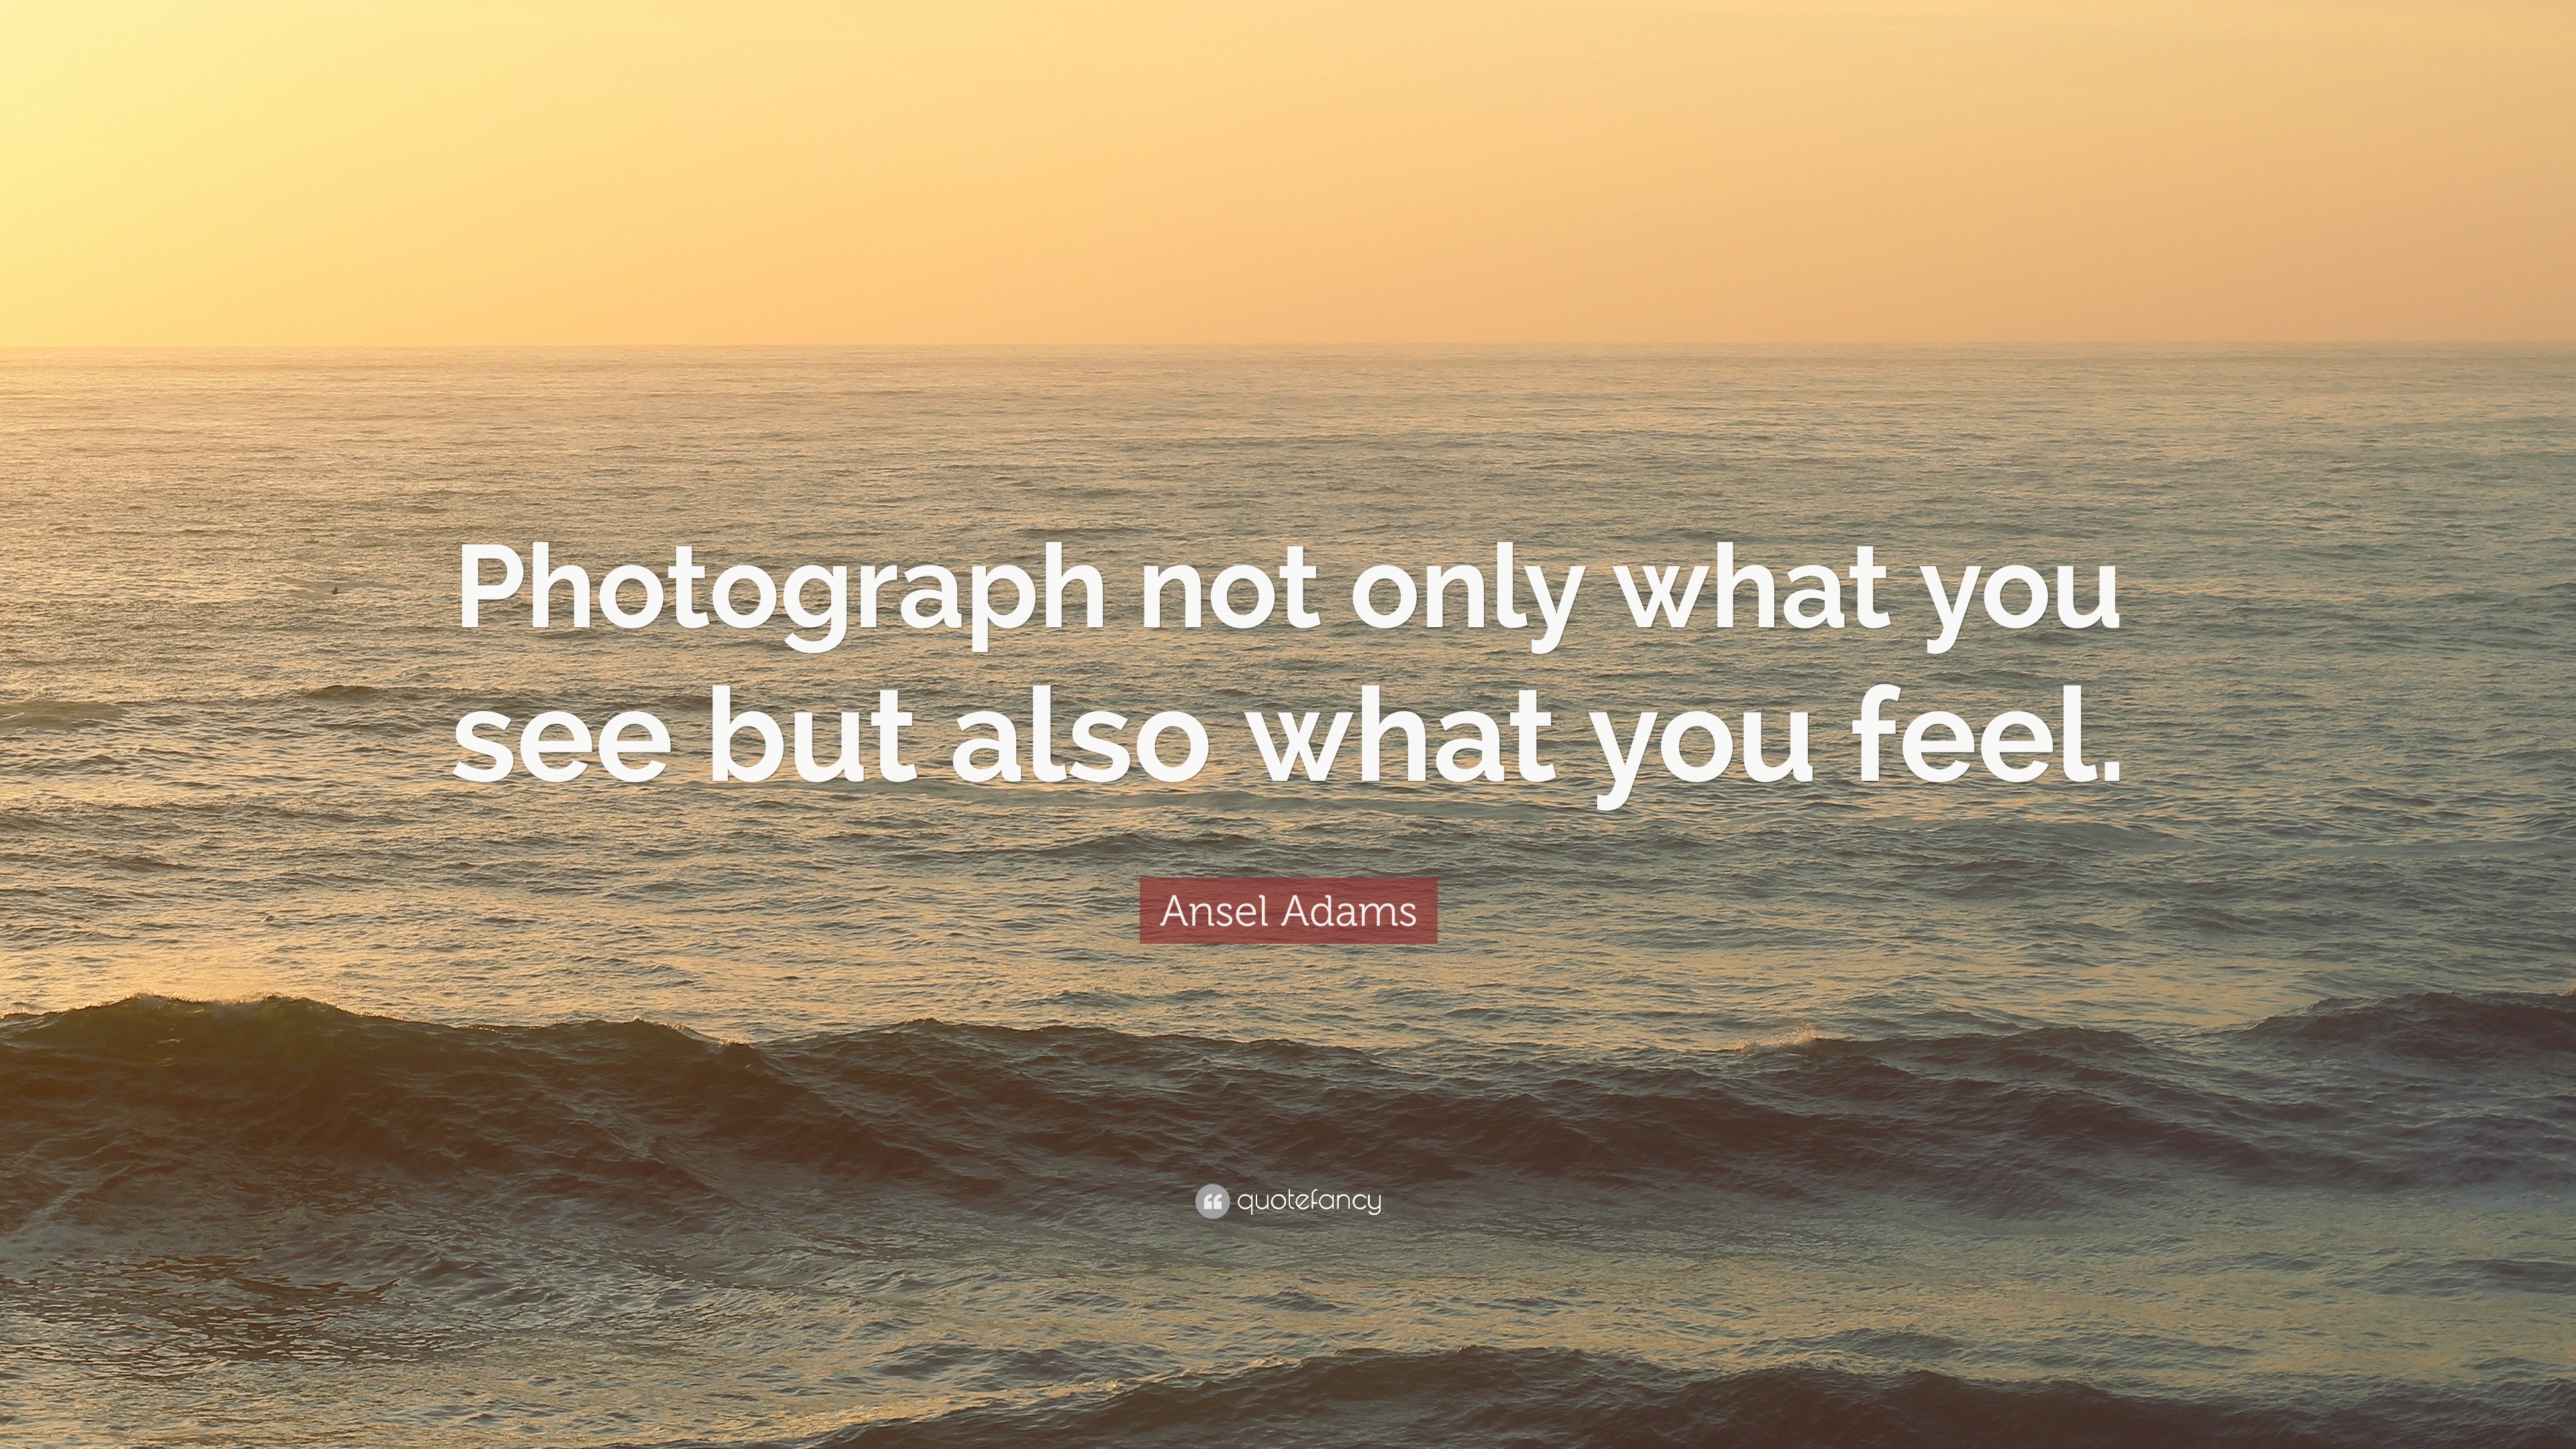 Ansel Adams Quote: “Photograph not only what you see but also what you ...